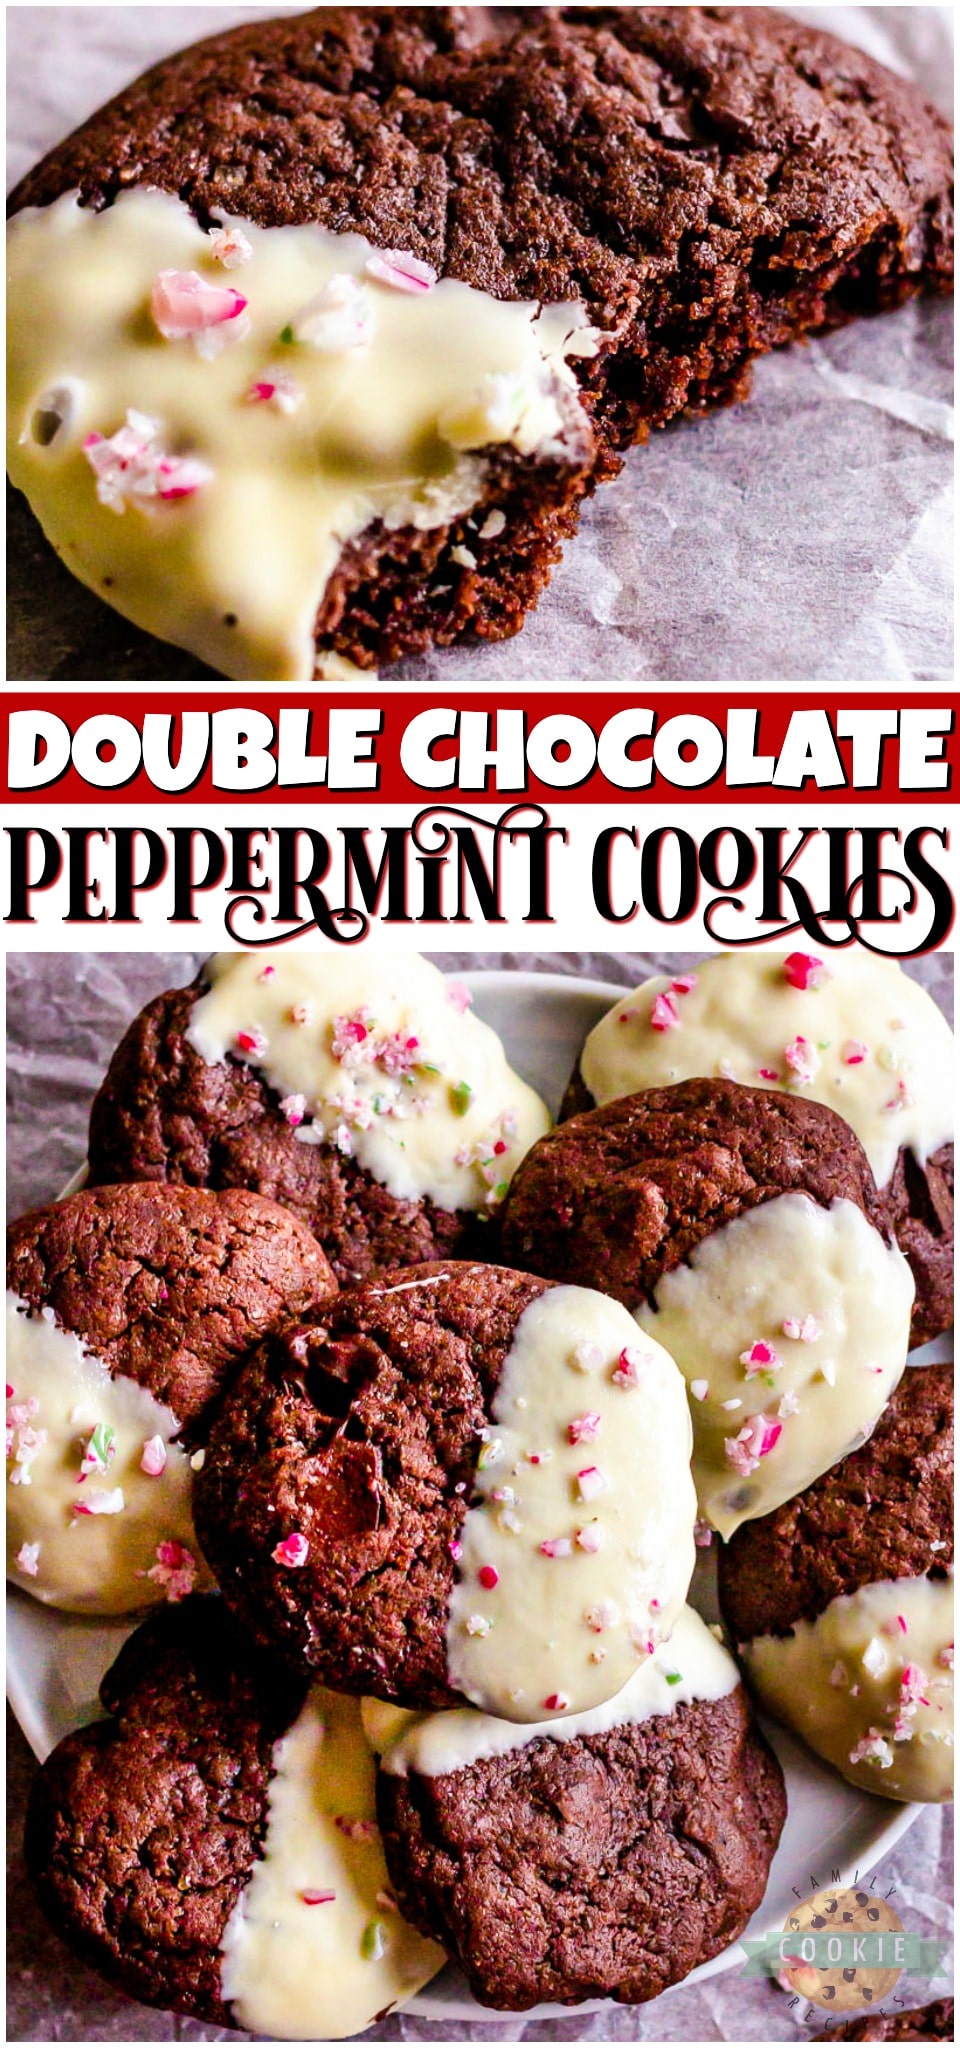 Chocolate Peppermint Cookies are a delicious double chocolate minty cookie that's dipped in white chocolate! Festive holiday cookie perfect for goodie trays! 